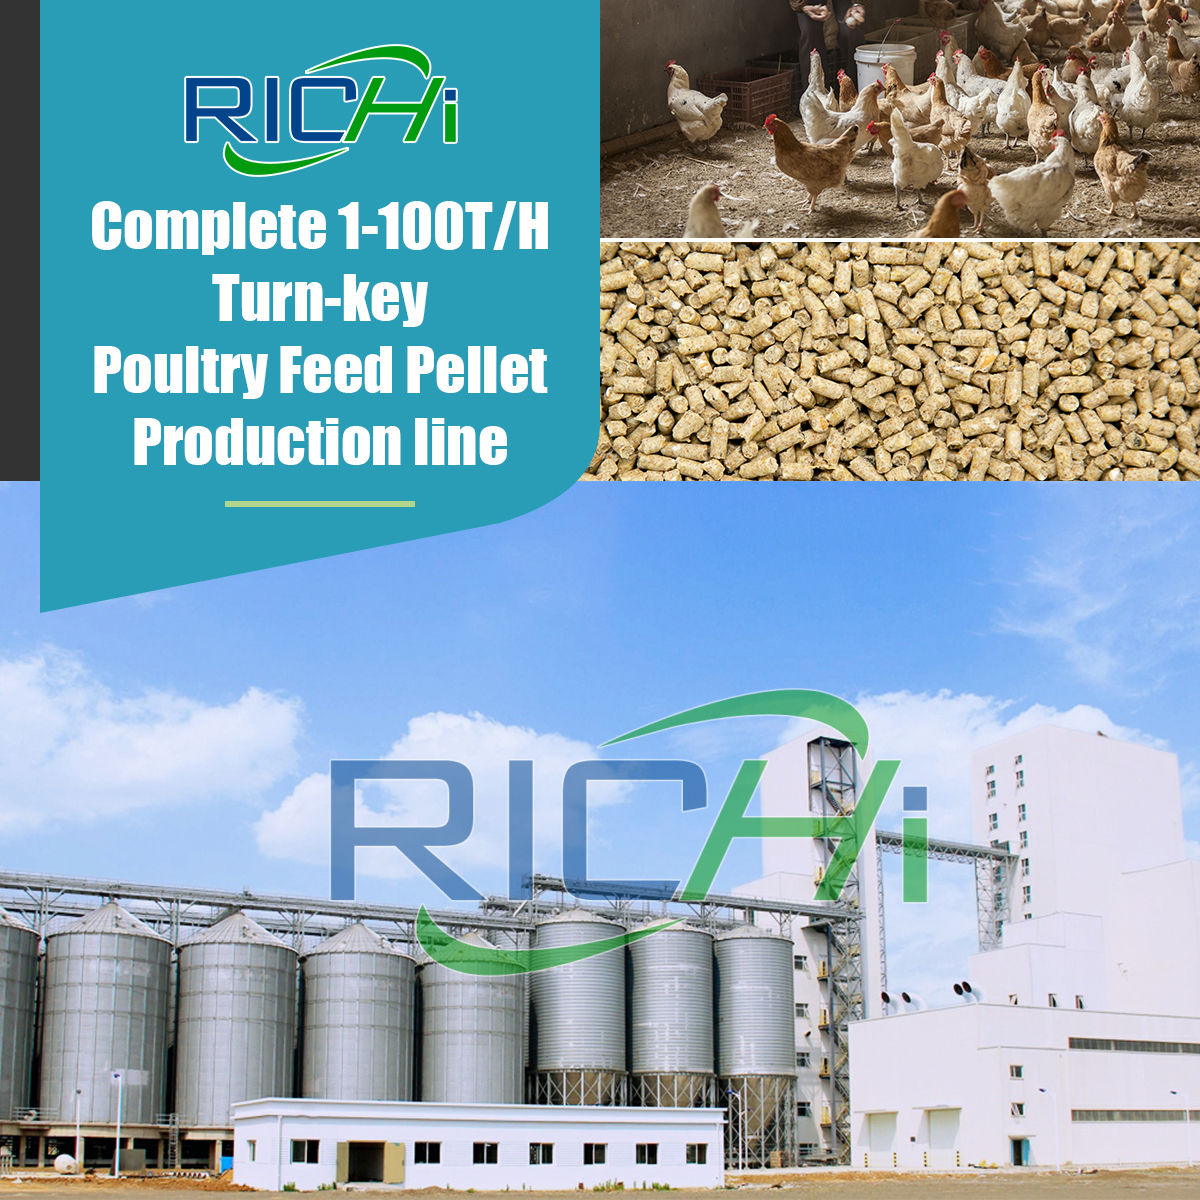 poultry feed manufacturing project report